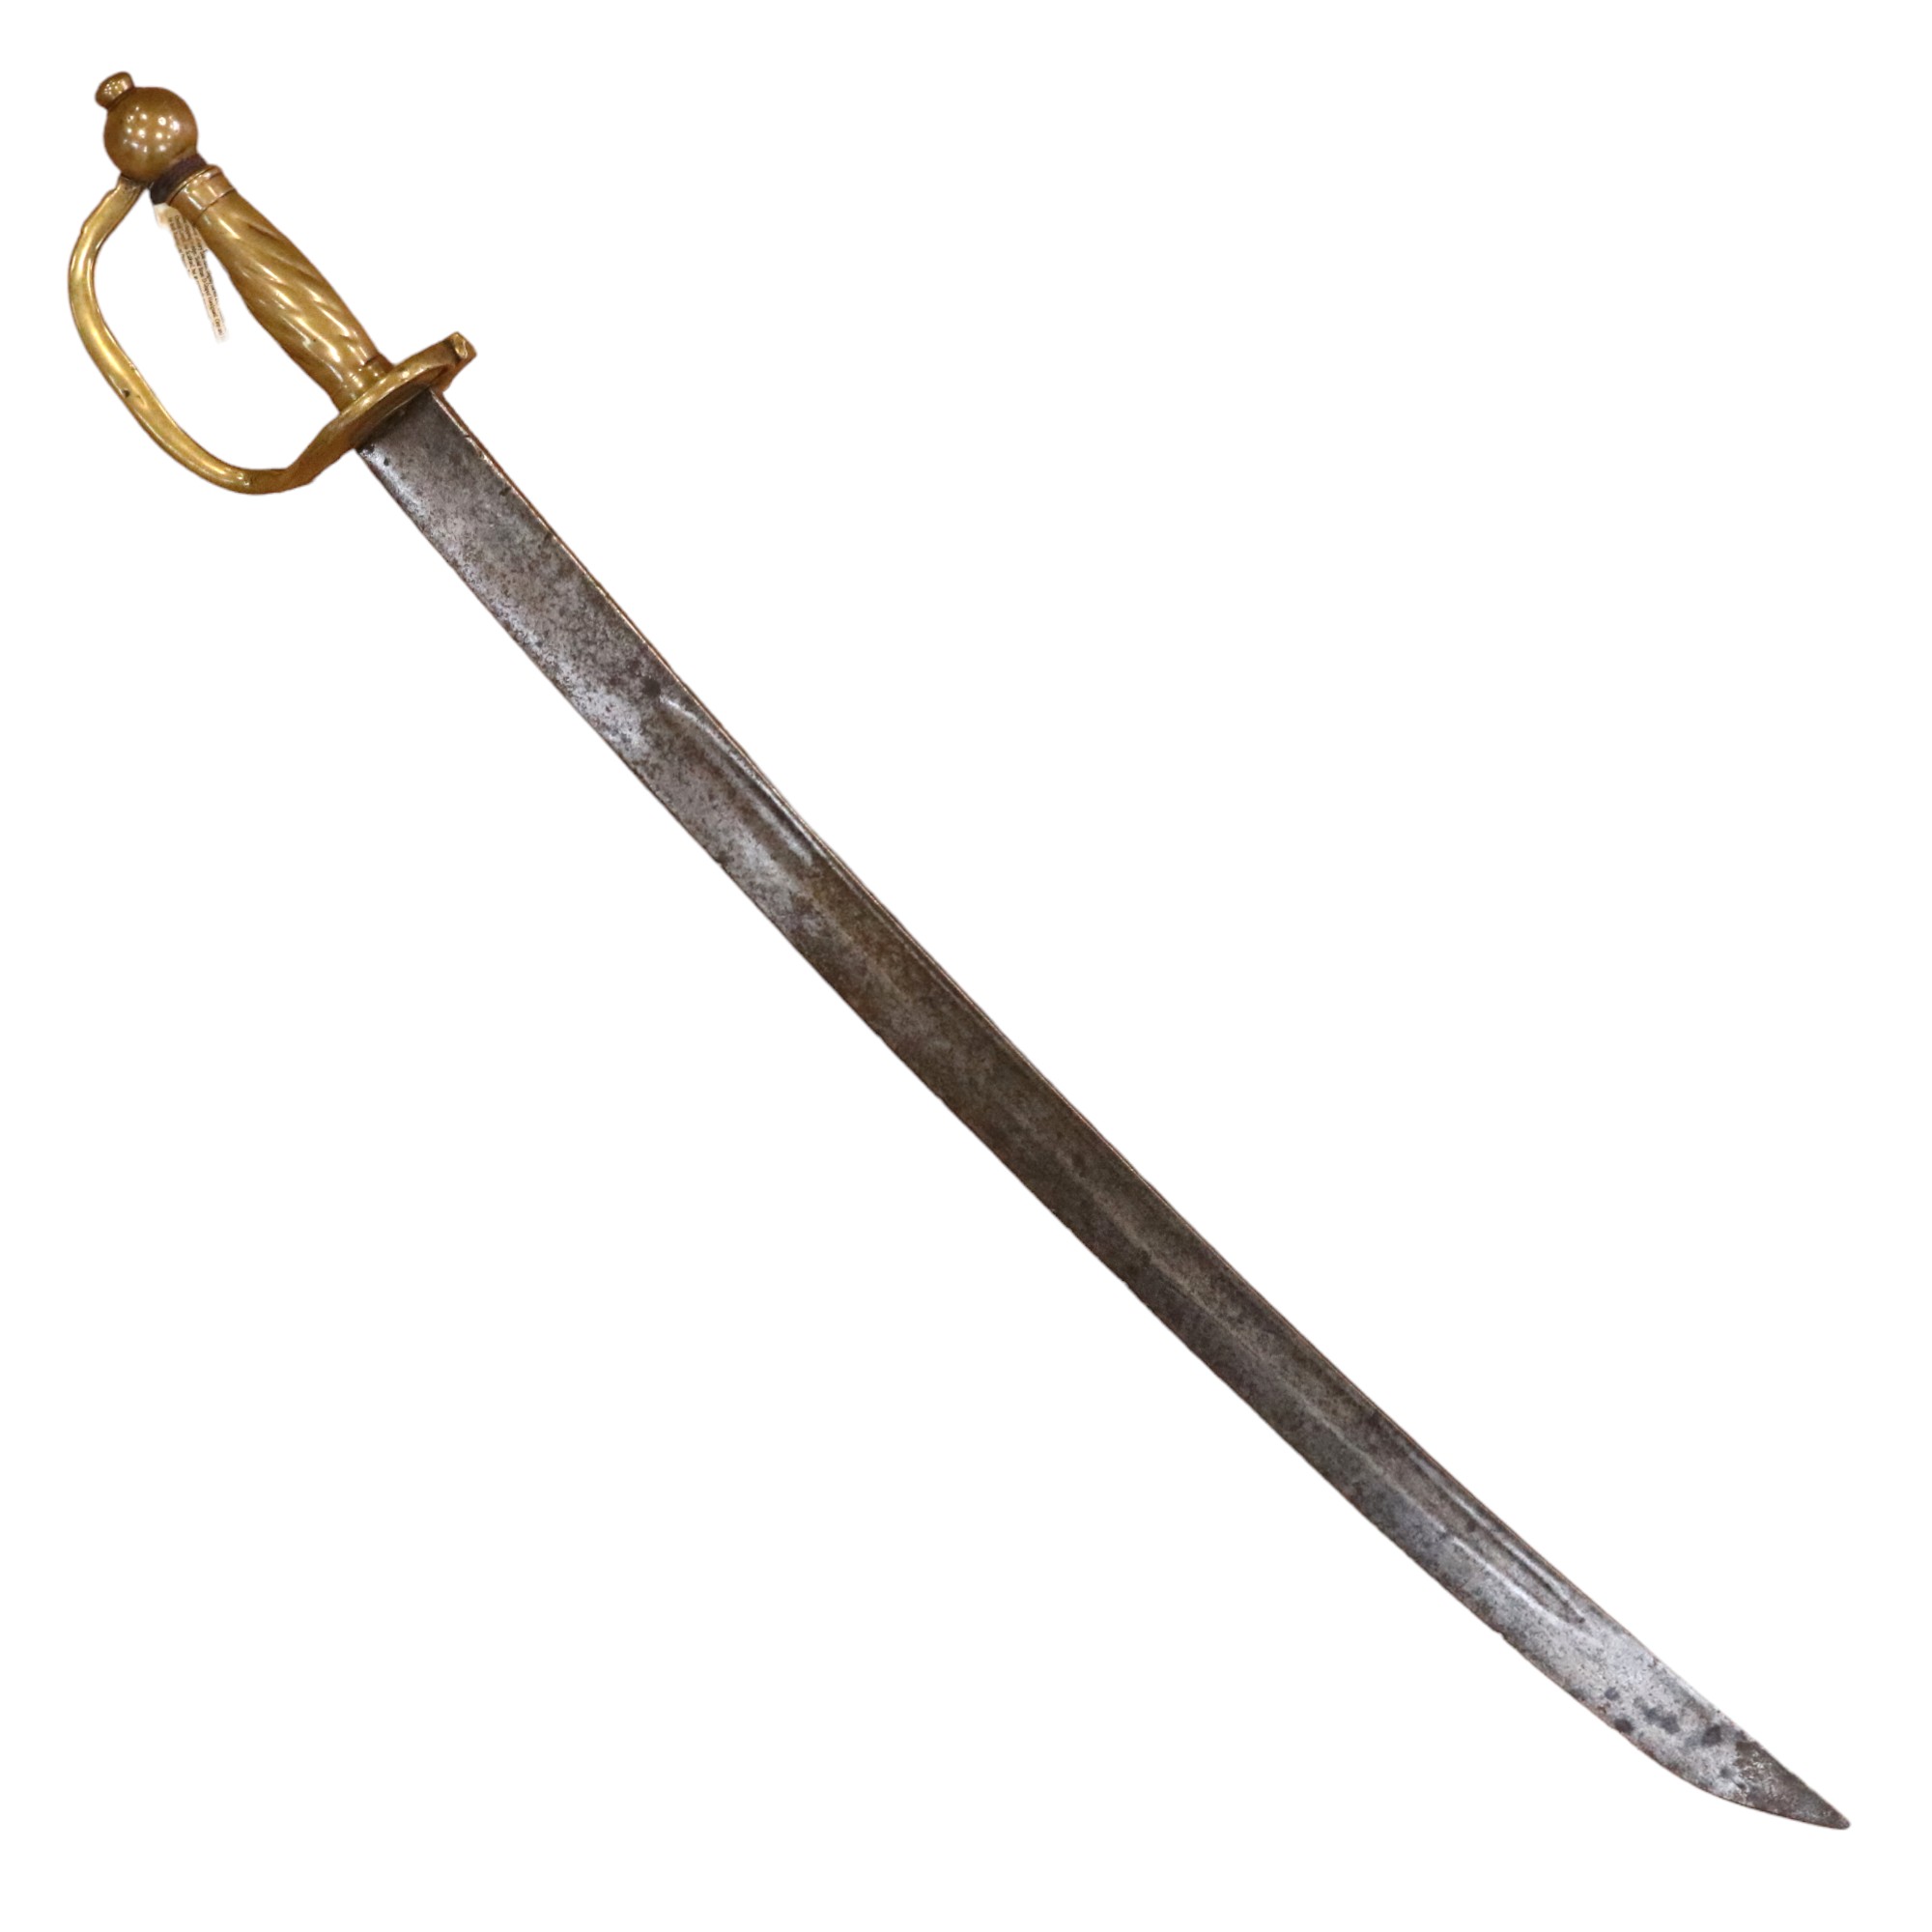 A mid-to-late 18th Century Russian / Prussian infantry short sword / hanger, 79 cm - Image 2 of 3